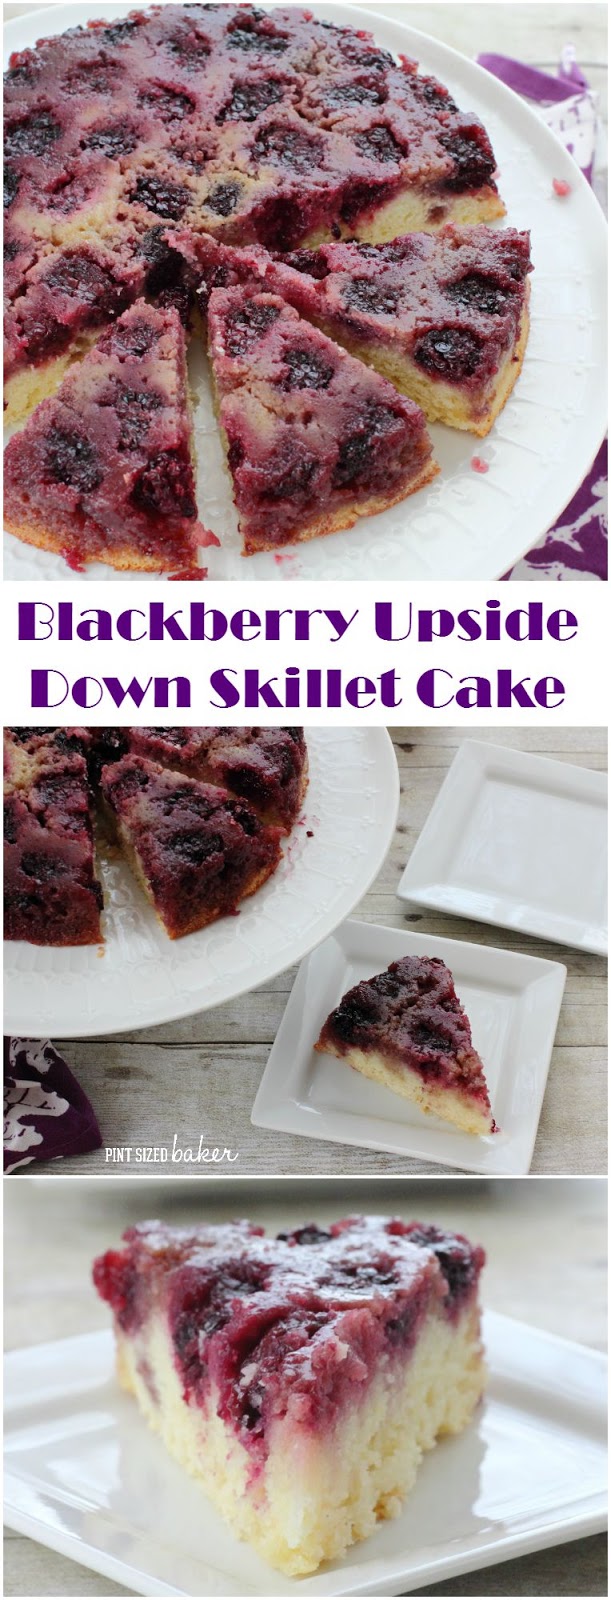 This cake is sweetened with Almond Extract and studded with fresh Blackberries. Everyone will love this easy Blackberry Upside down Skillet Cake for dessert tonight!